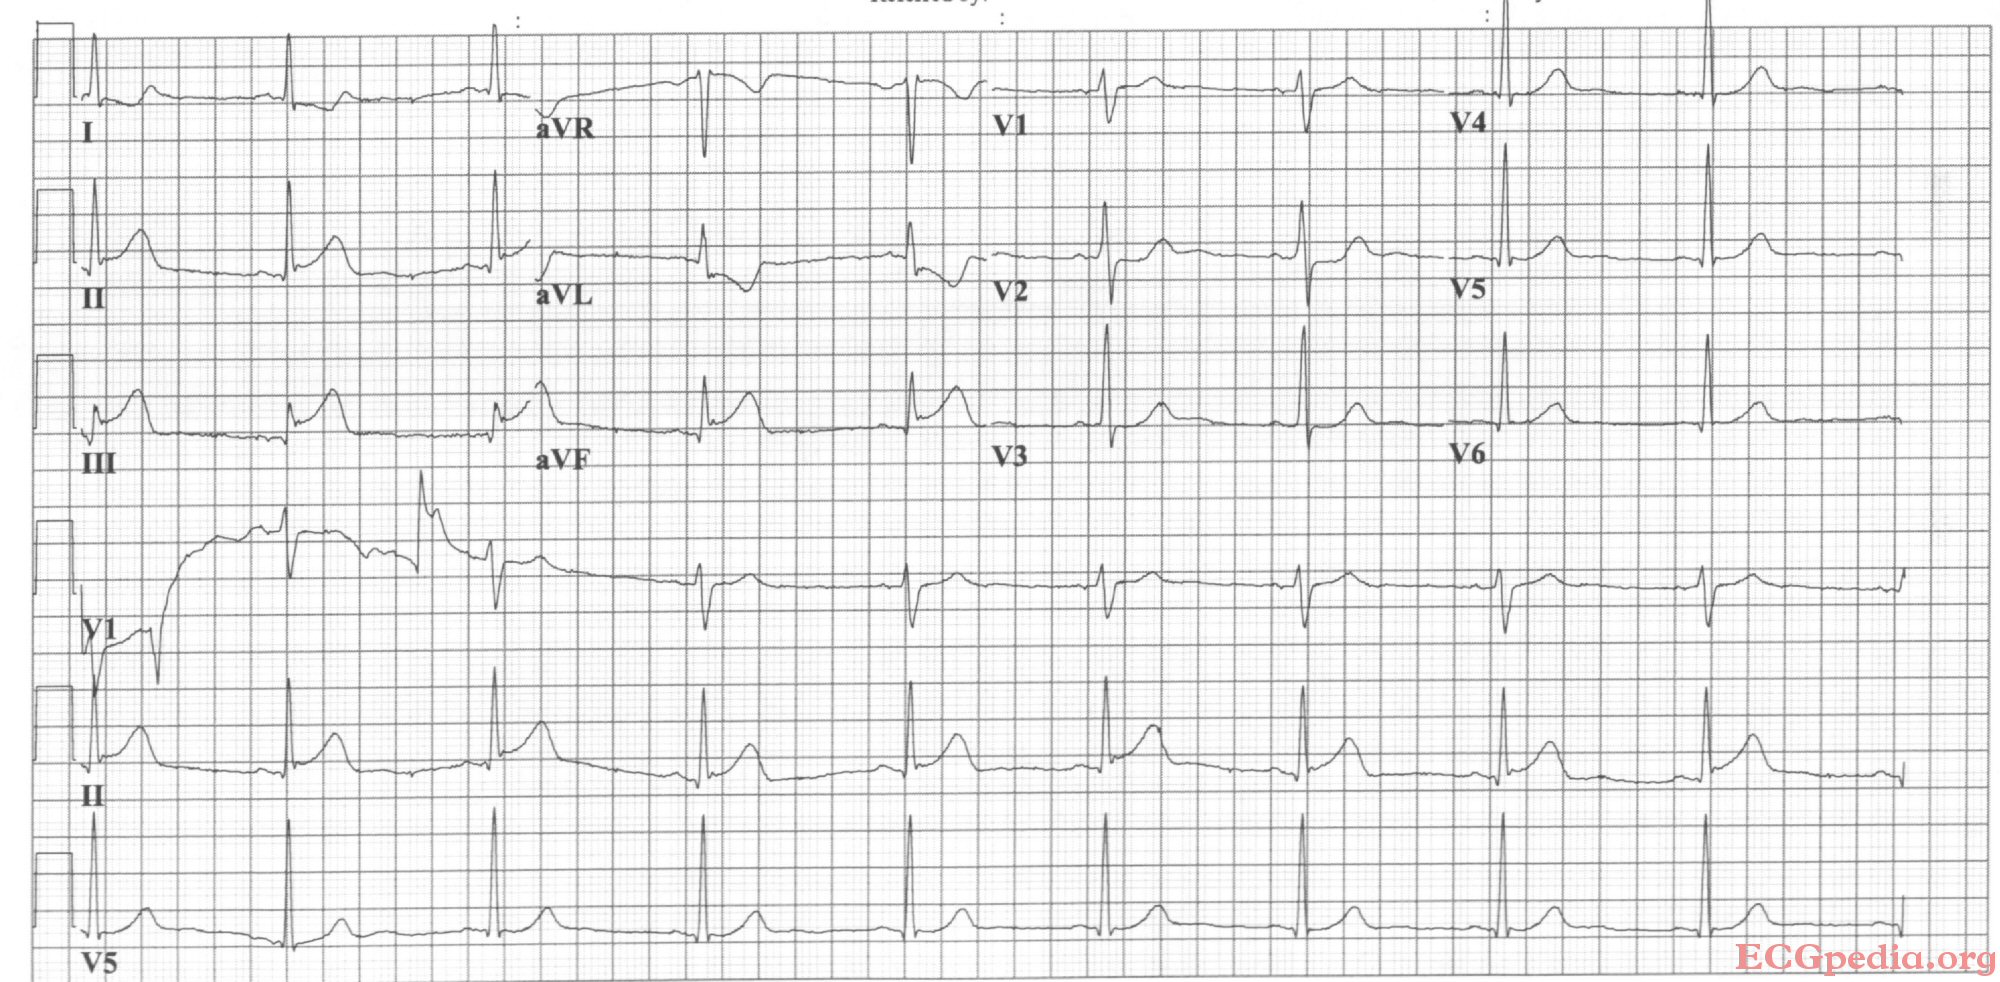 Acute inferoposterior MI: ST elevation in II, III, AVF (in III > II). ST depression in I, AVL, V2. Tall R in V2, otherwise normal QRS morphology.